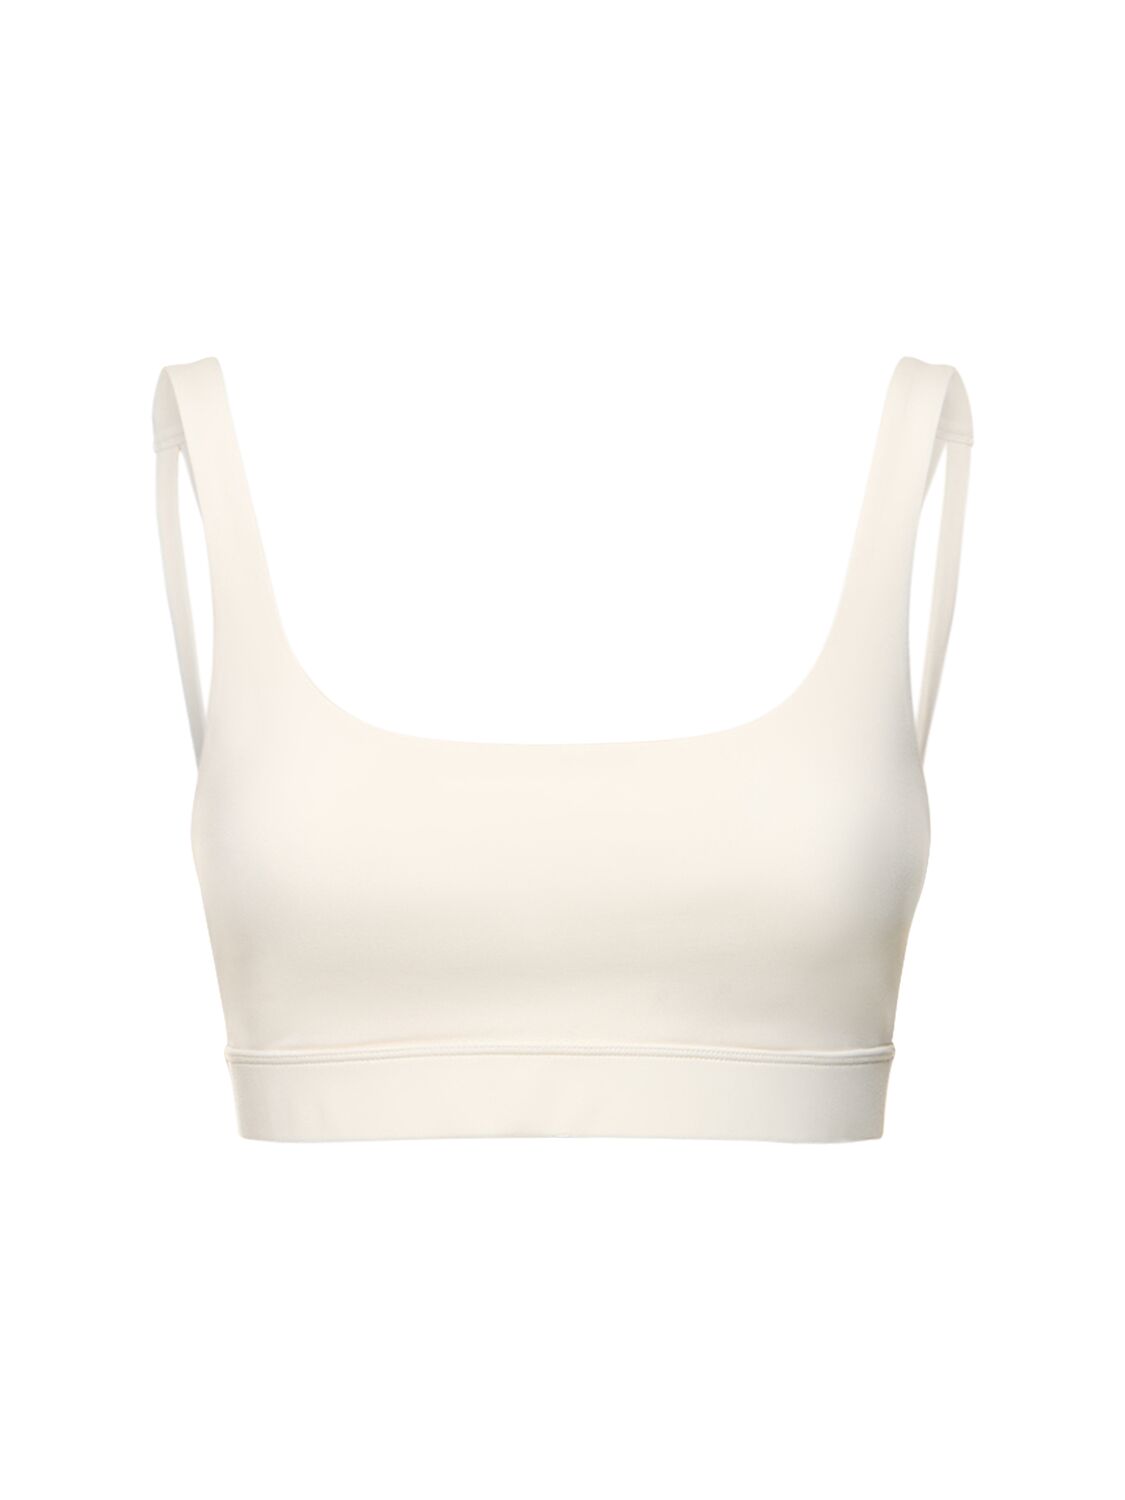 Girlfriend Collective Andy Stretch Tech Bra Top In White